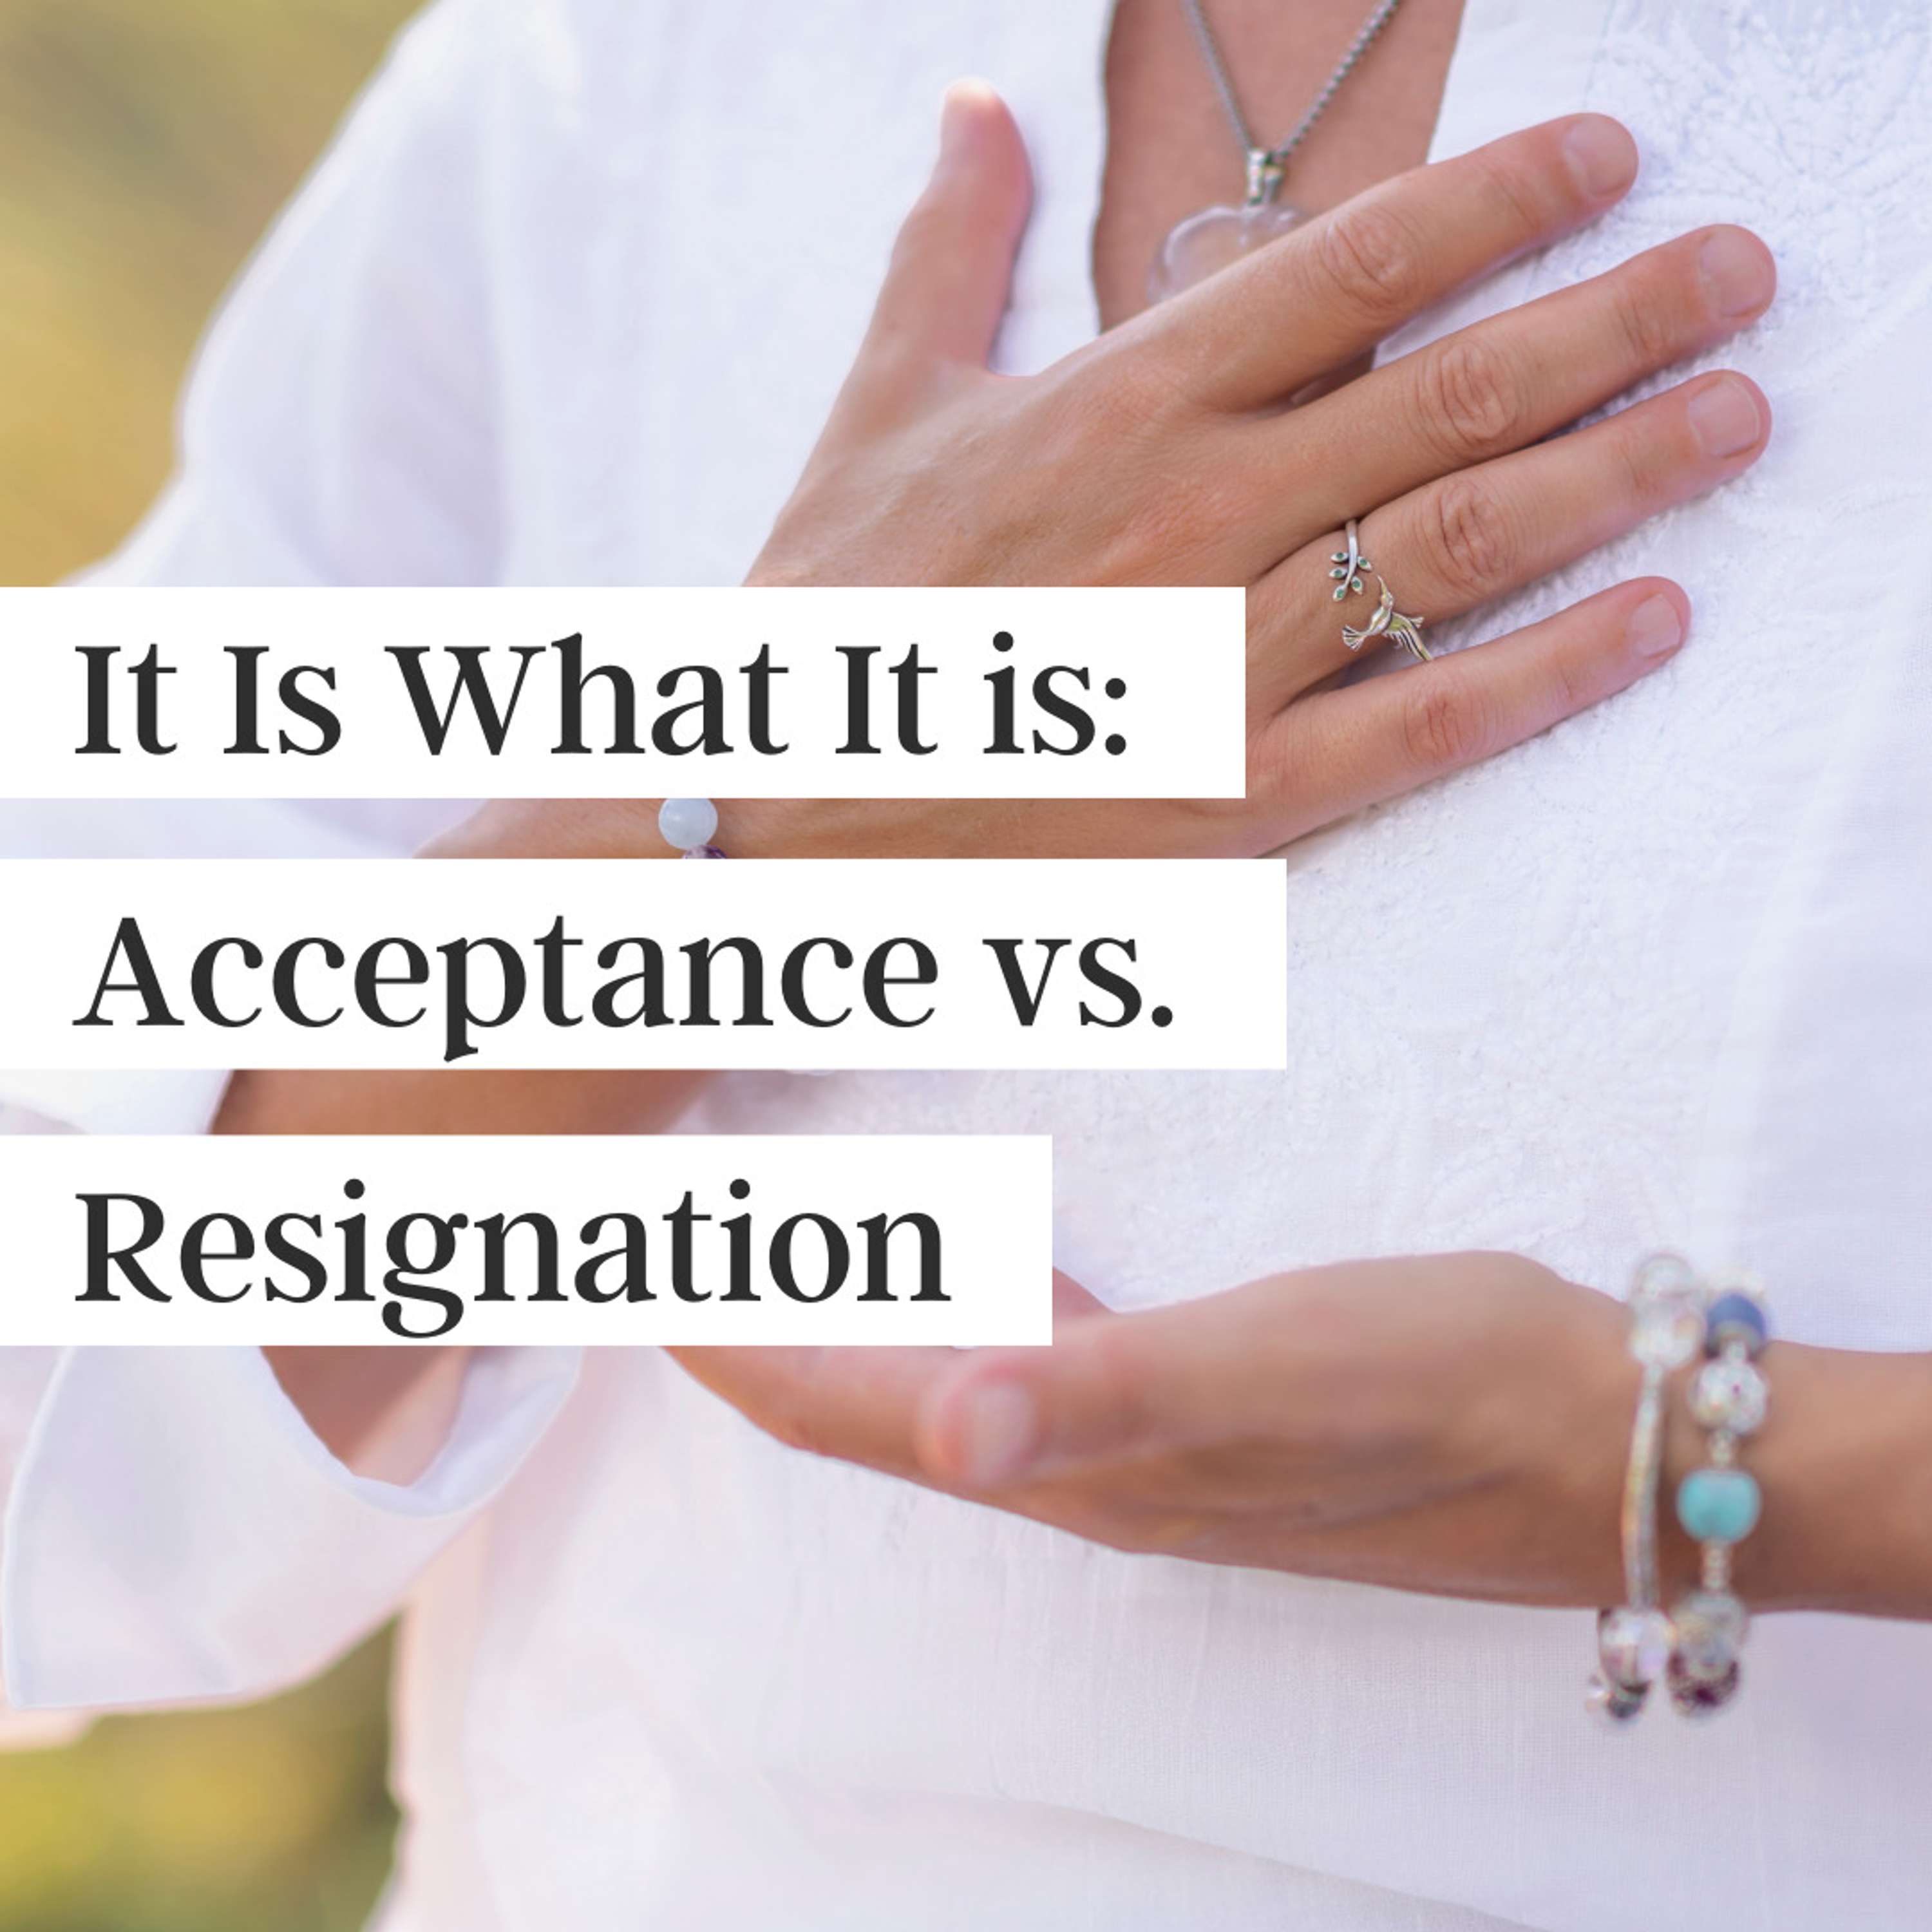 It Is What it Is: Acceptance vs. Resignation